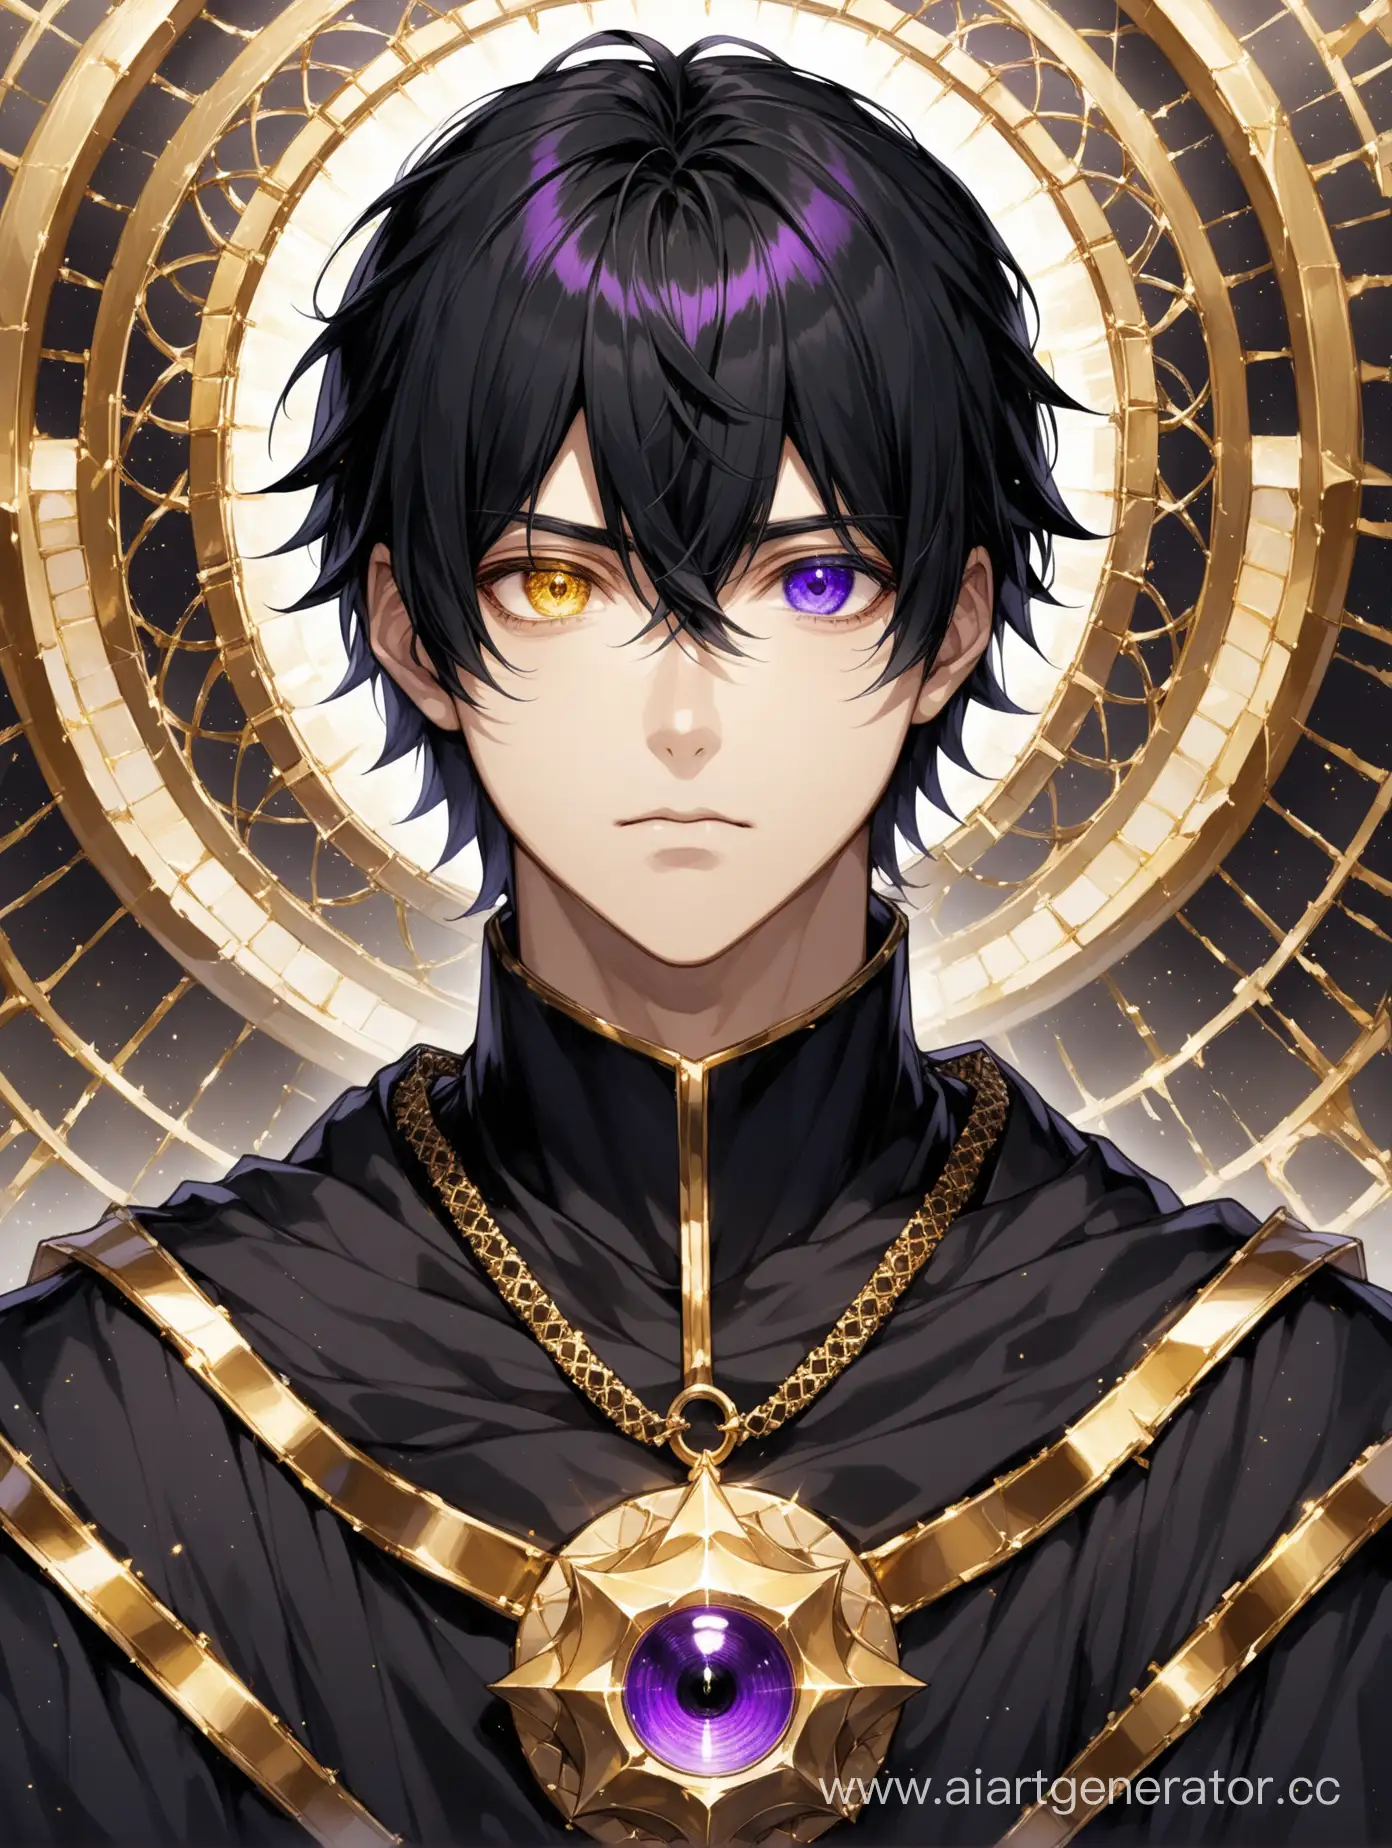 A young man, 25 years old, with medium-length black hair and eyes of different colors (heterochromia): the iris of the left eye is violet, and the iris of the right eye is golden. no facial hair, light skin, fragile build, no emotions on the face, wearing a black robe with a purple lining and gold ornament. In Void